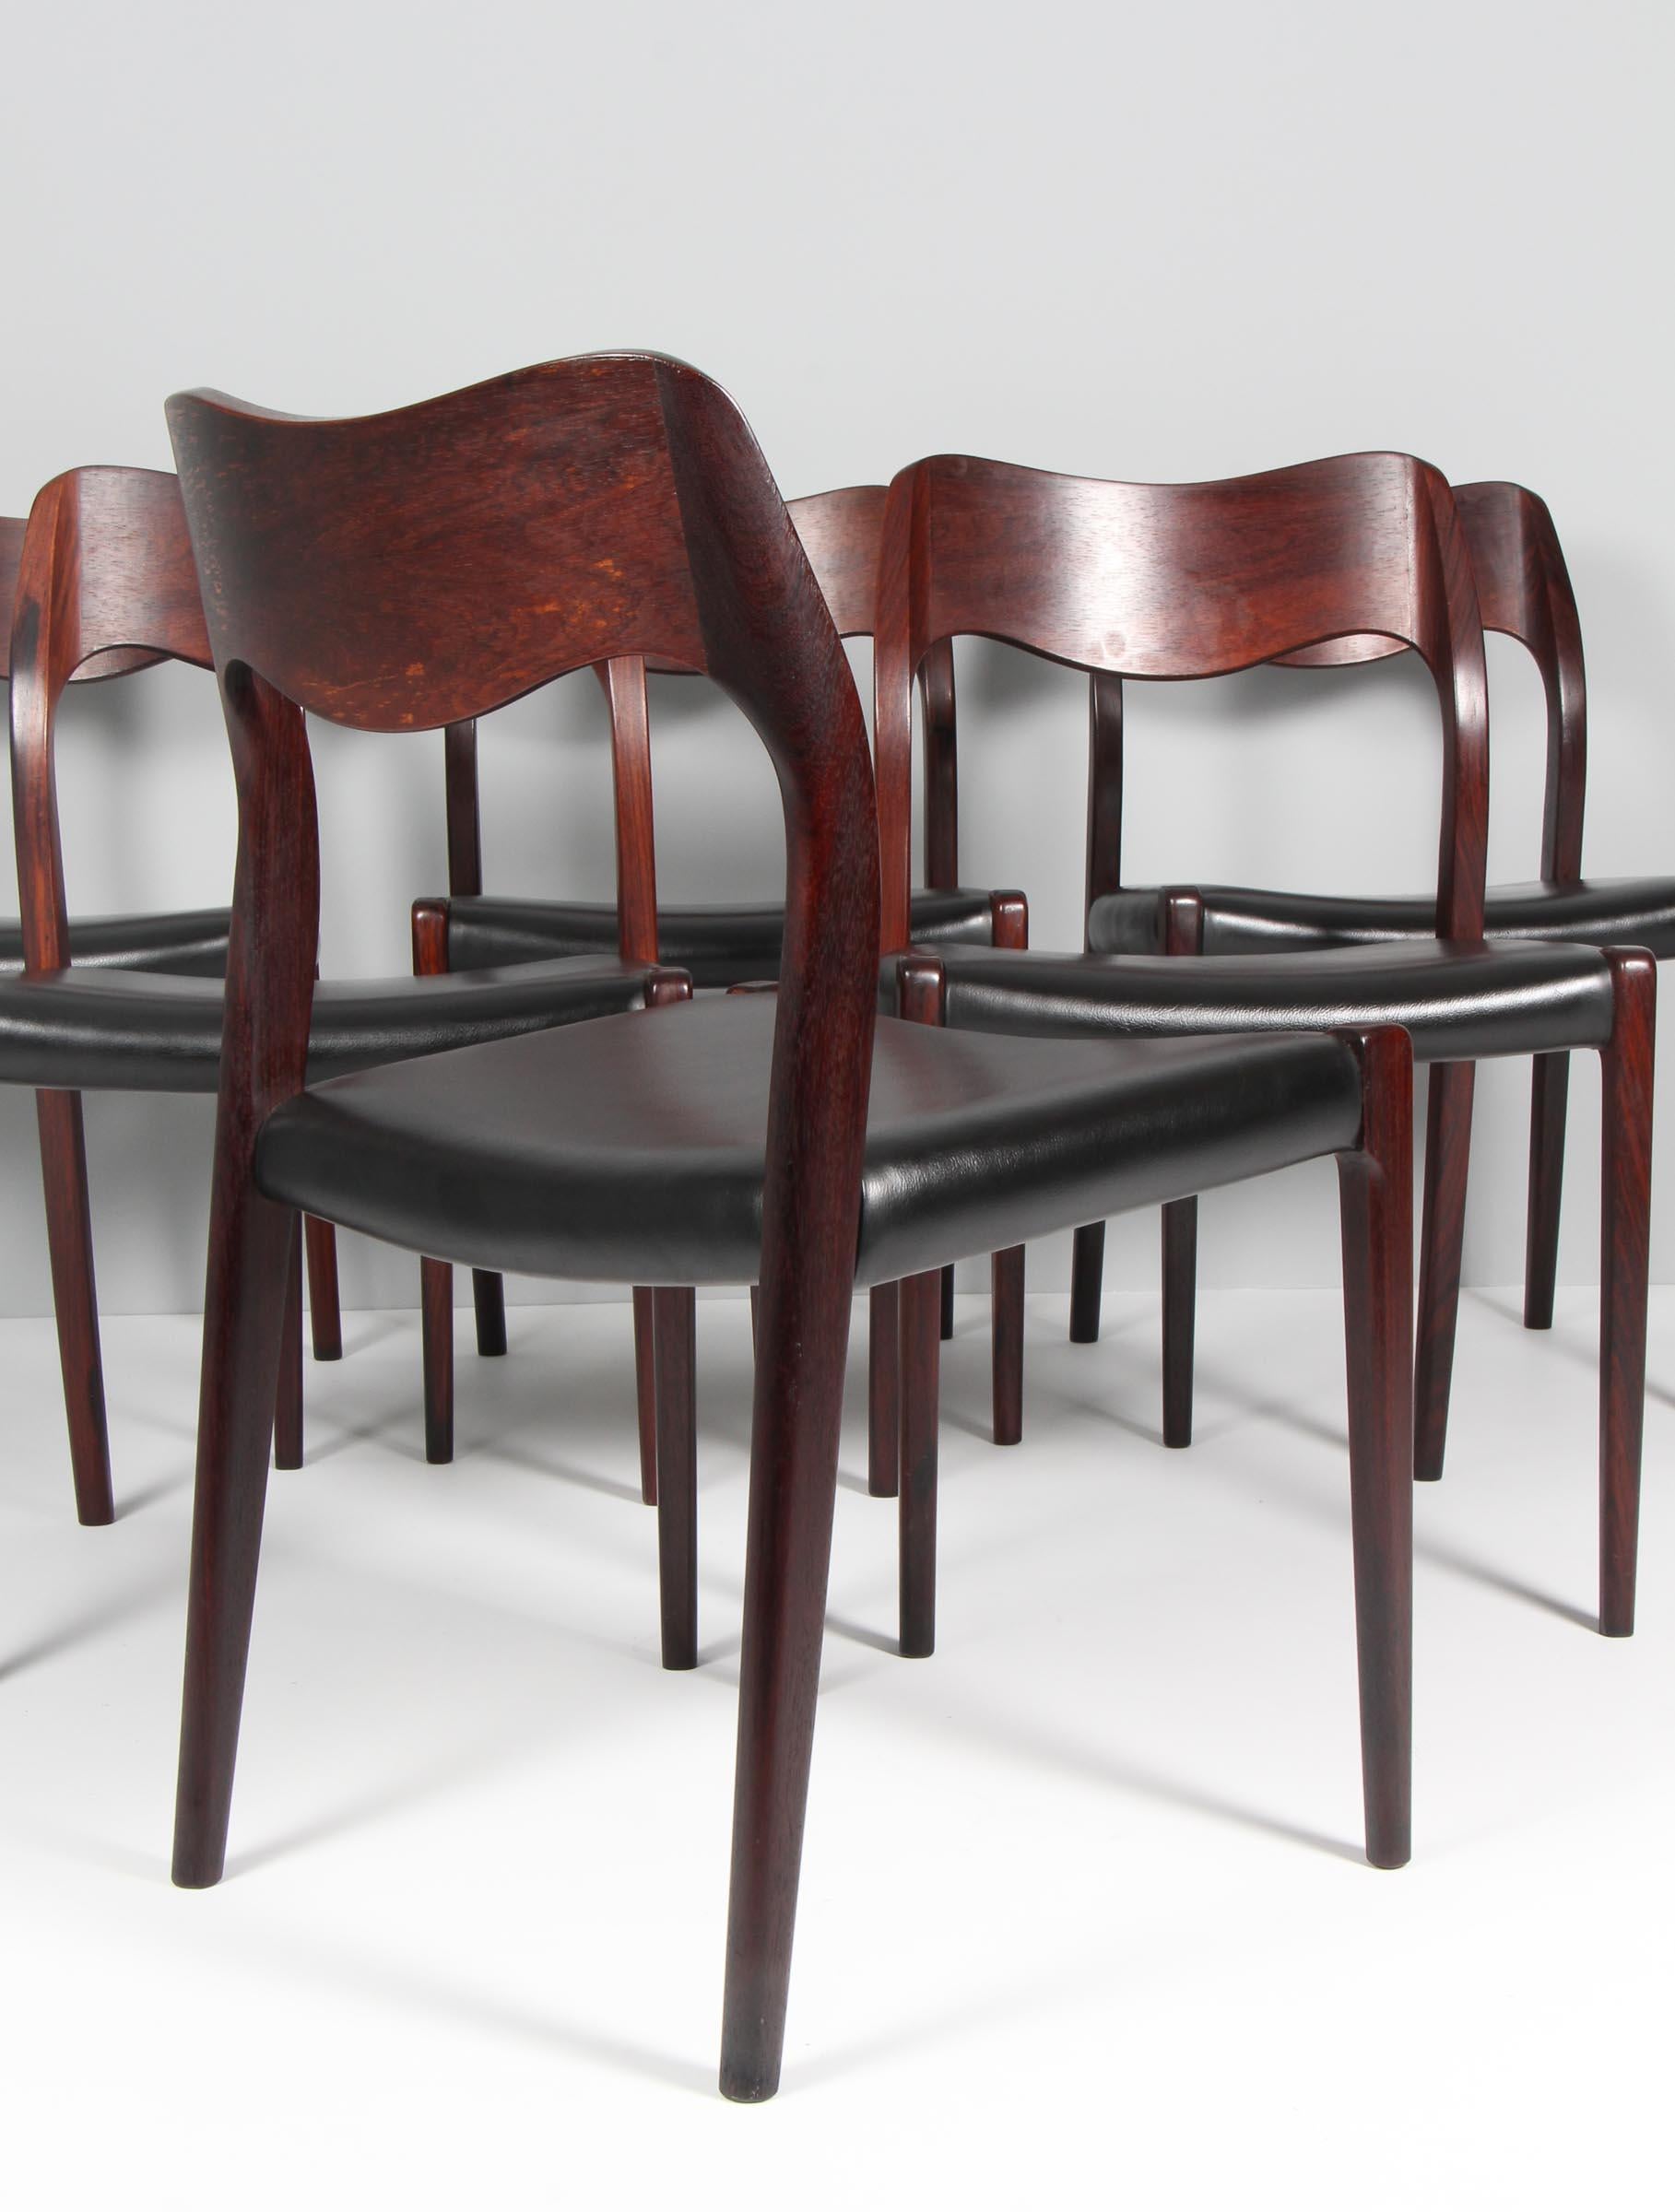 Mid-20th Century N. O. Møller Set of Six Dining Chairs